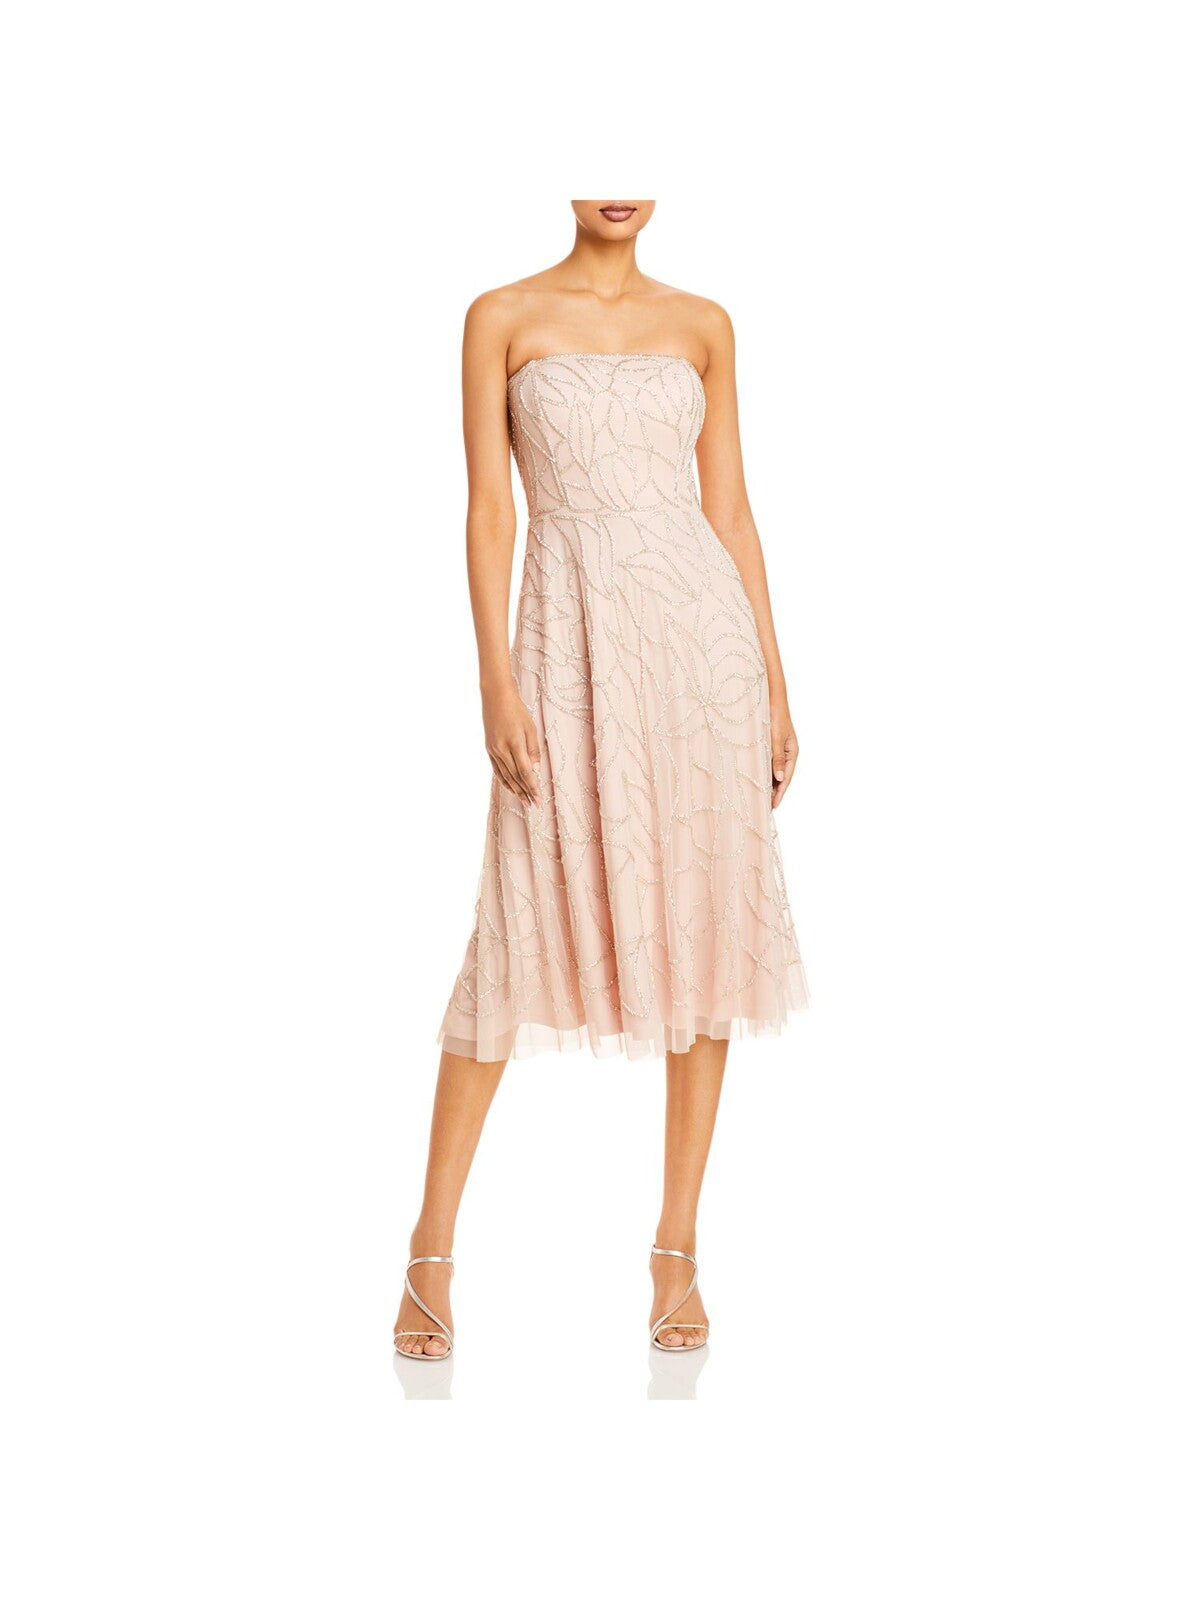 AIDAN MATTOX Womens Pink Beaded Zippered Sheer Lined Printed Sleeveless Strapless Below The Knee Cocktail Fit + Flare Dress 6